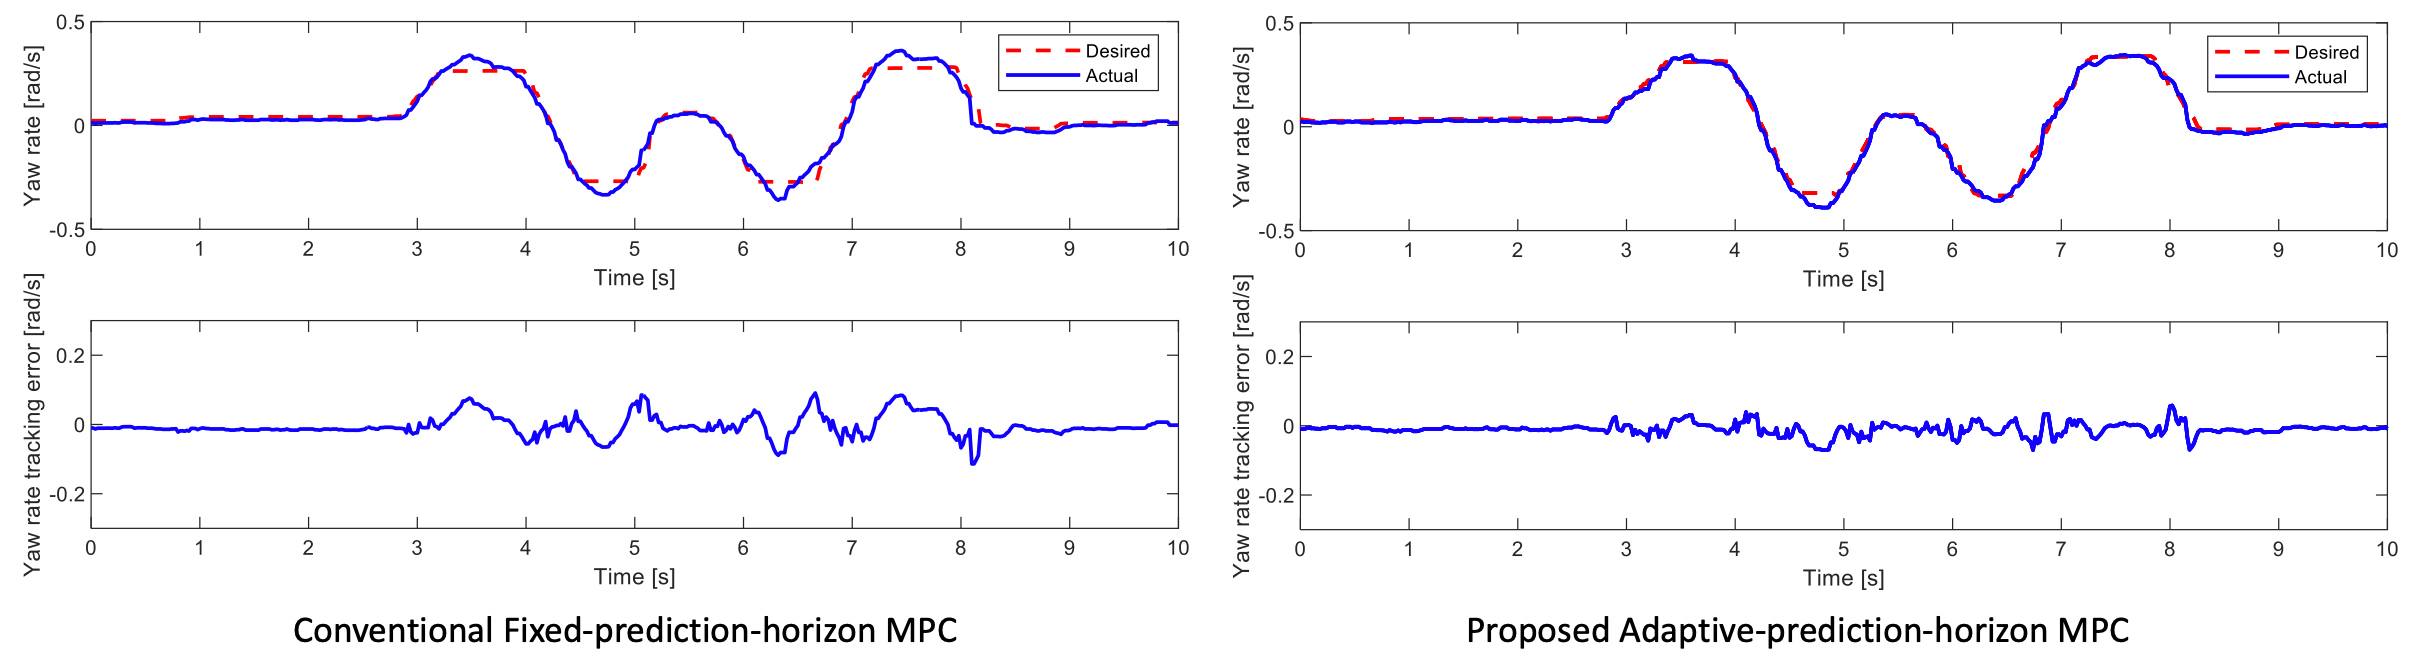 Conventional Fixed-prediction-horizon MPC and Proposed Adaptive-prediction-horizon MPC